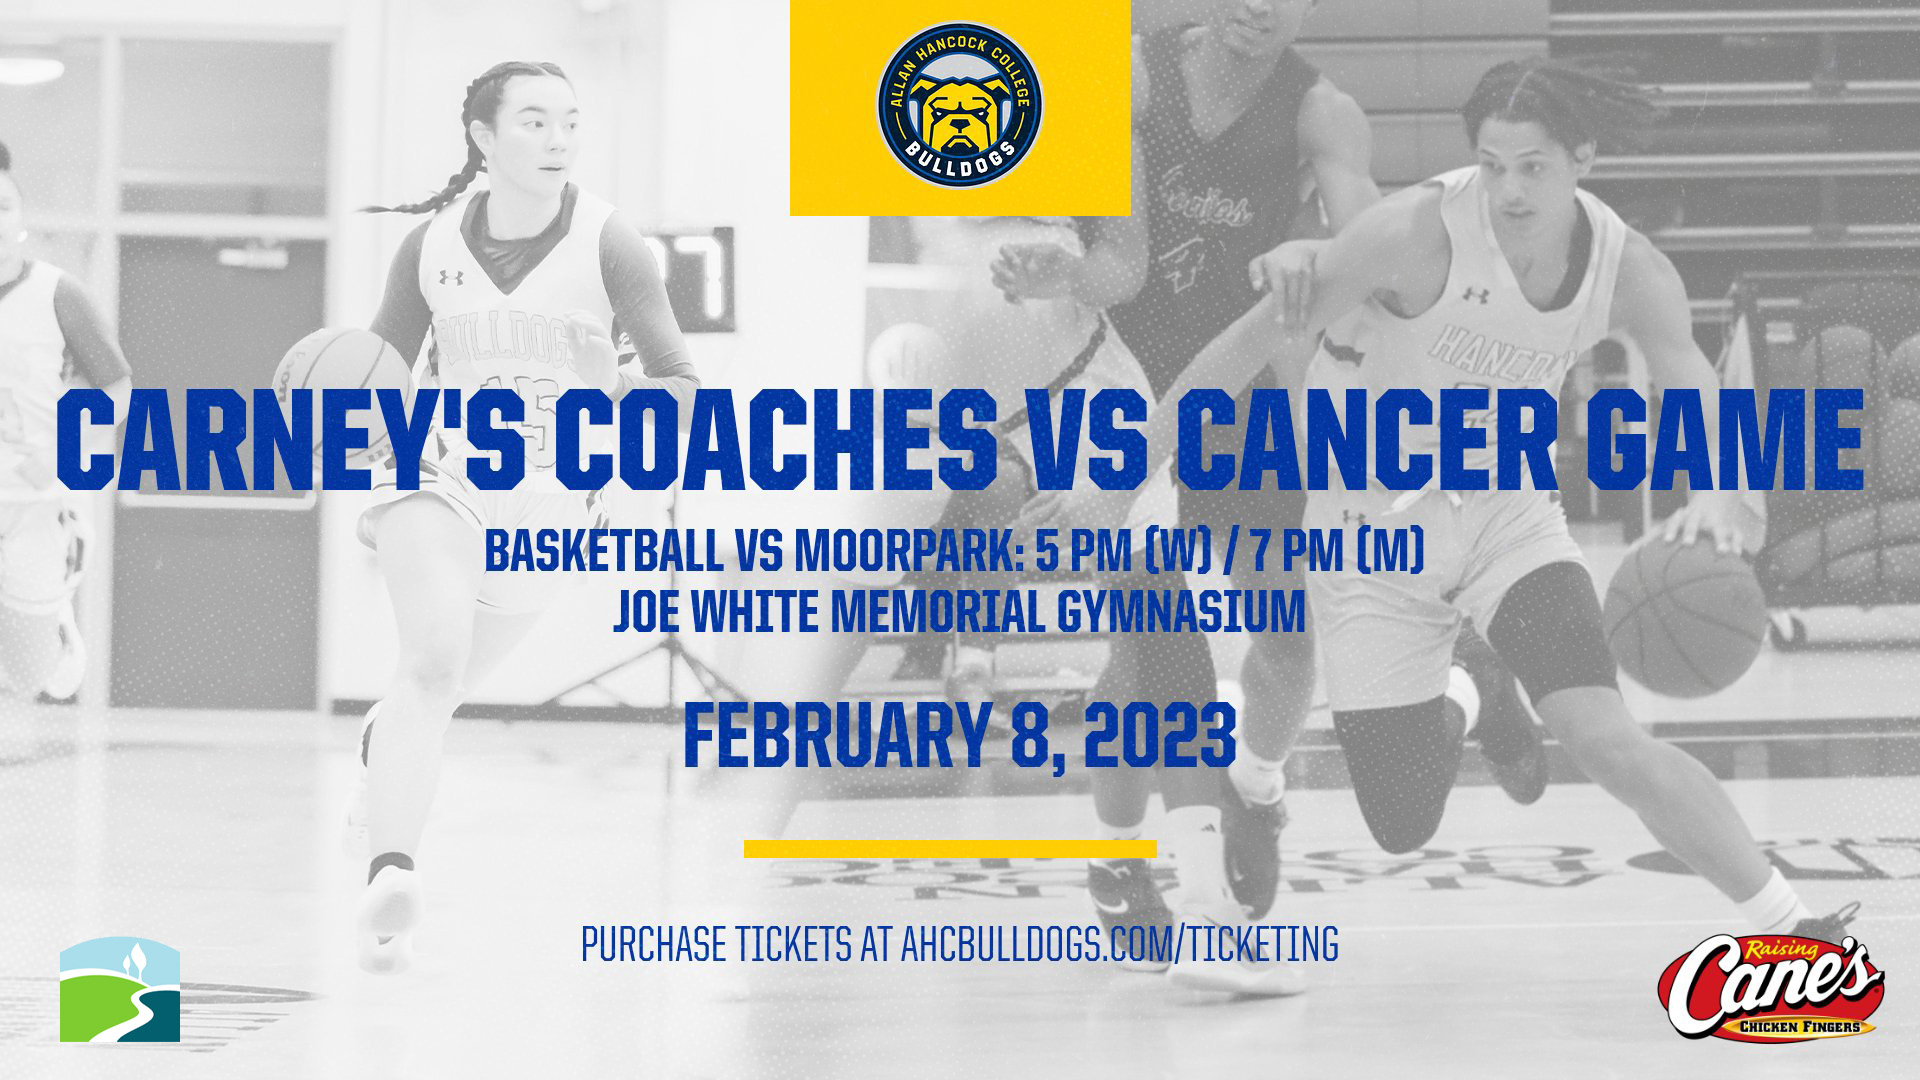 AHC Athletics to Partner with Raising Cane's for Annual Carney's Coaches vs. Cancer Game on Feb. 8